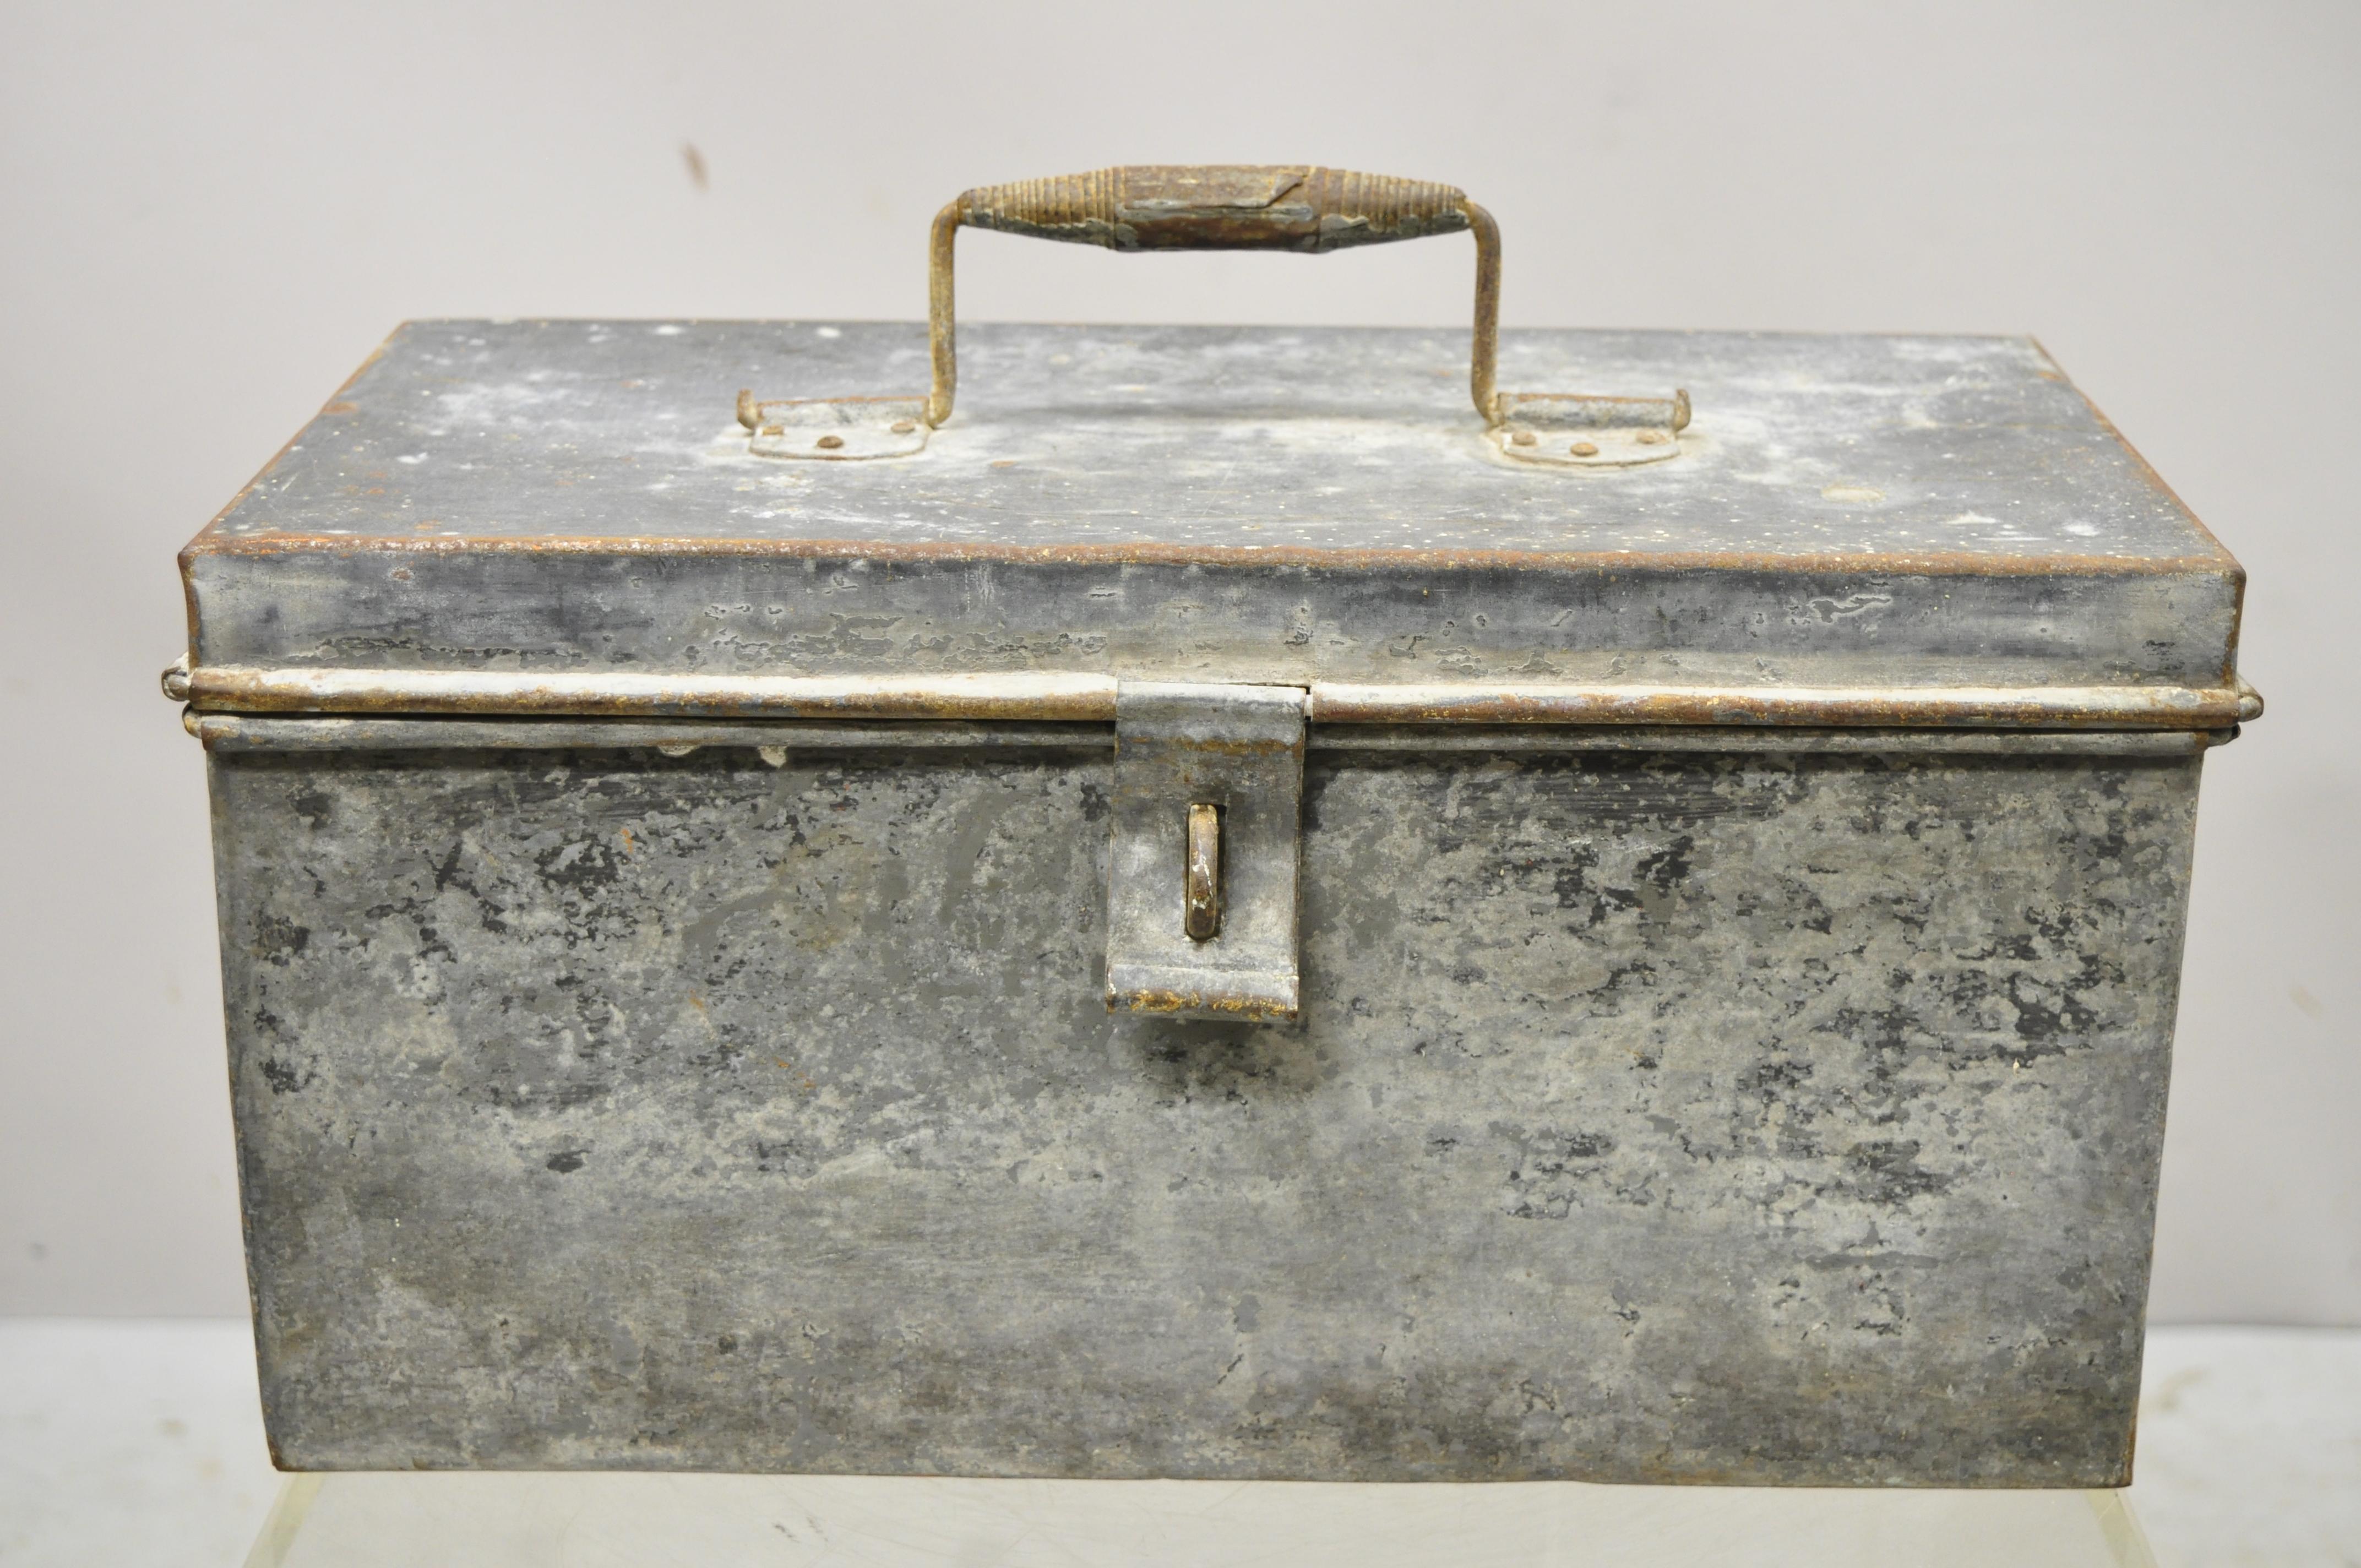 Antique Galvanized Steel Metal Rustic Tool Box with Handle 2